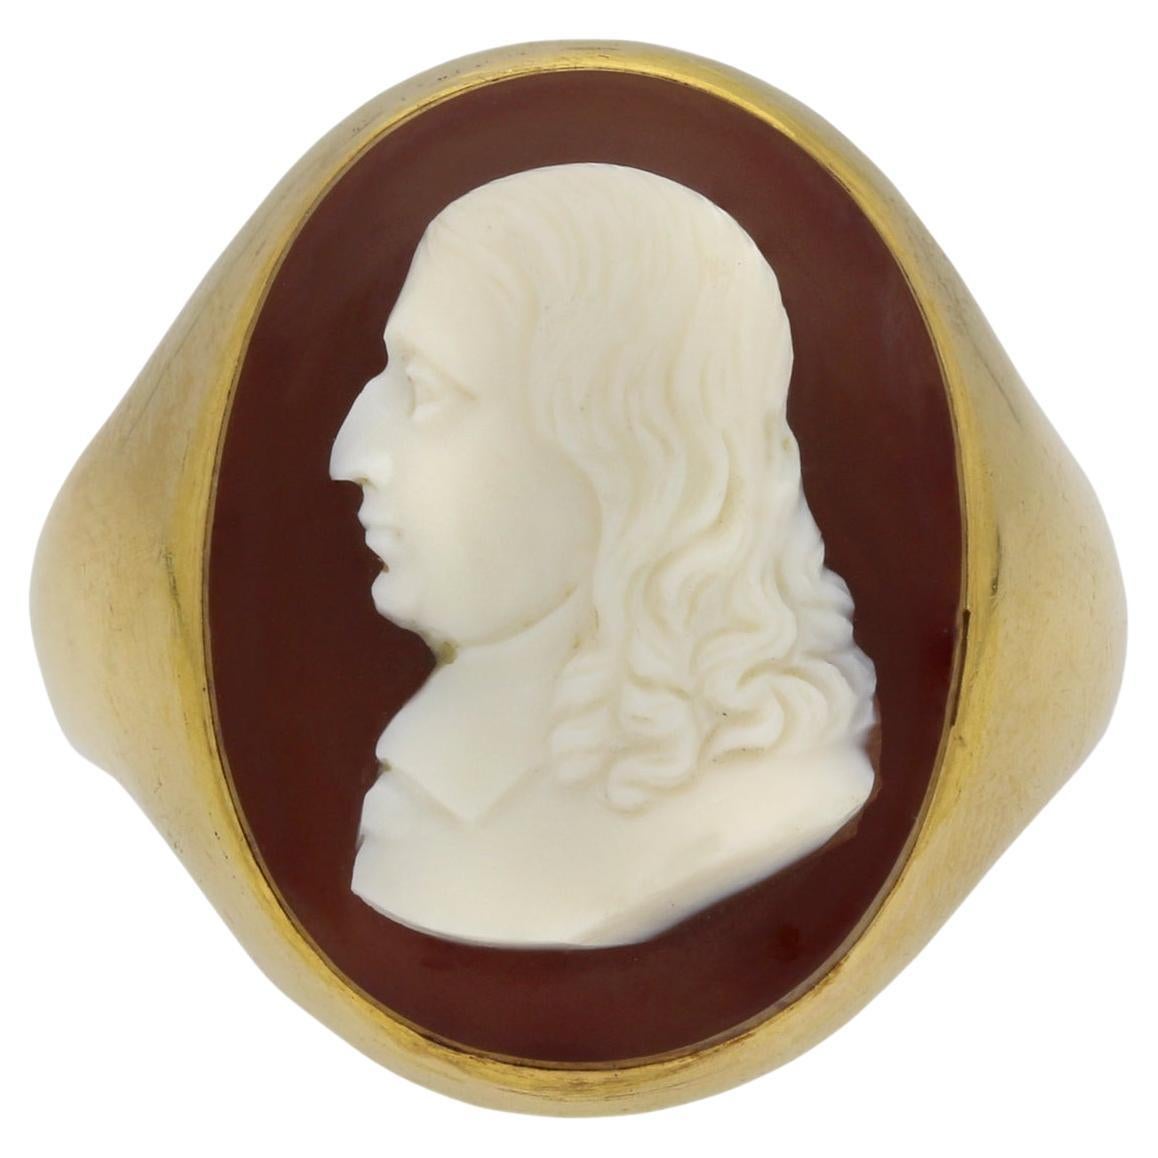 How can I tell how old a cameo brooch is?